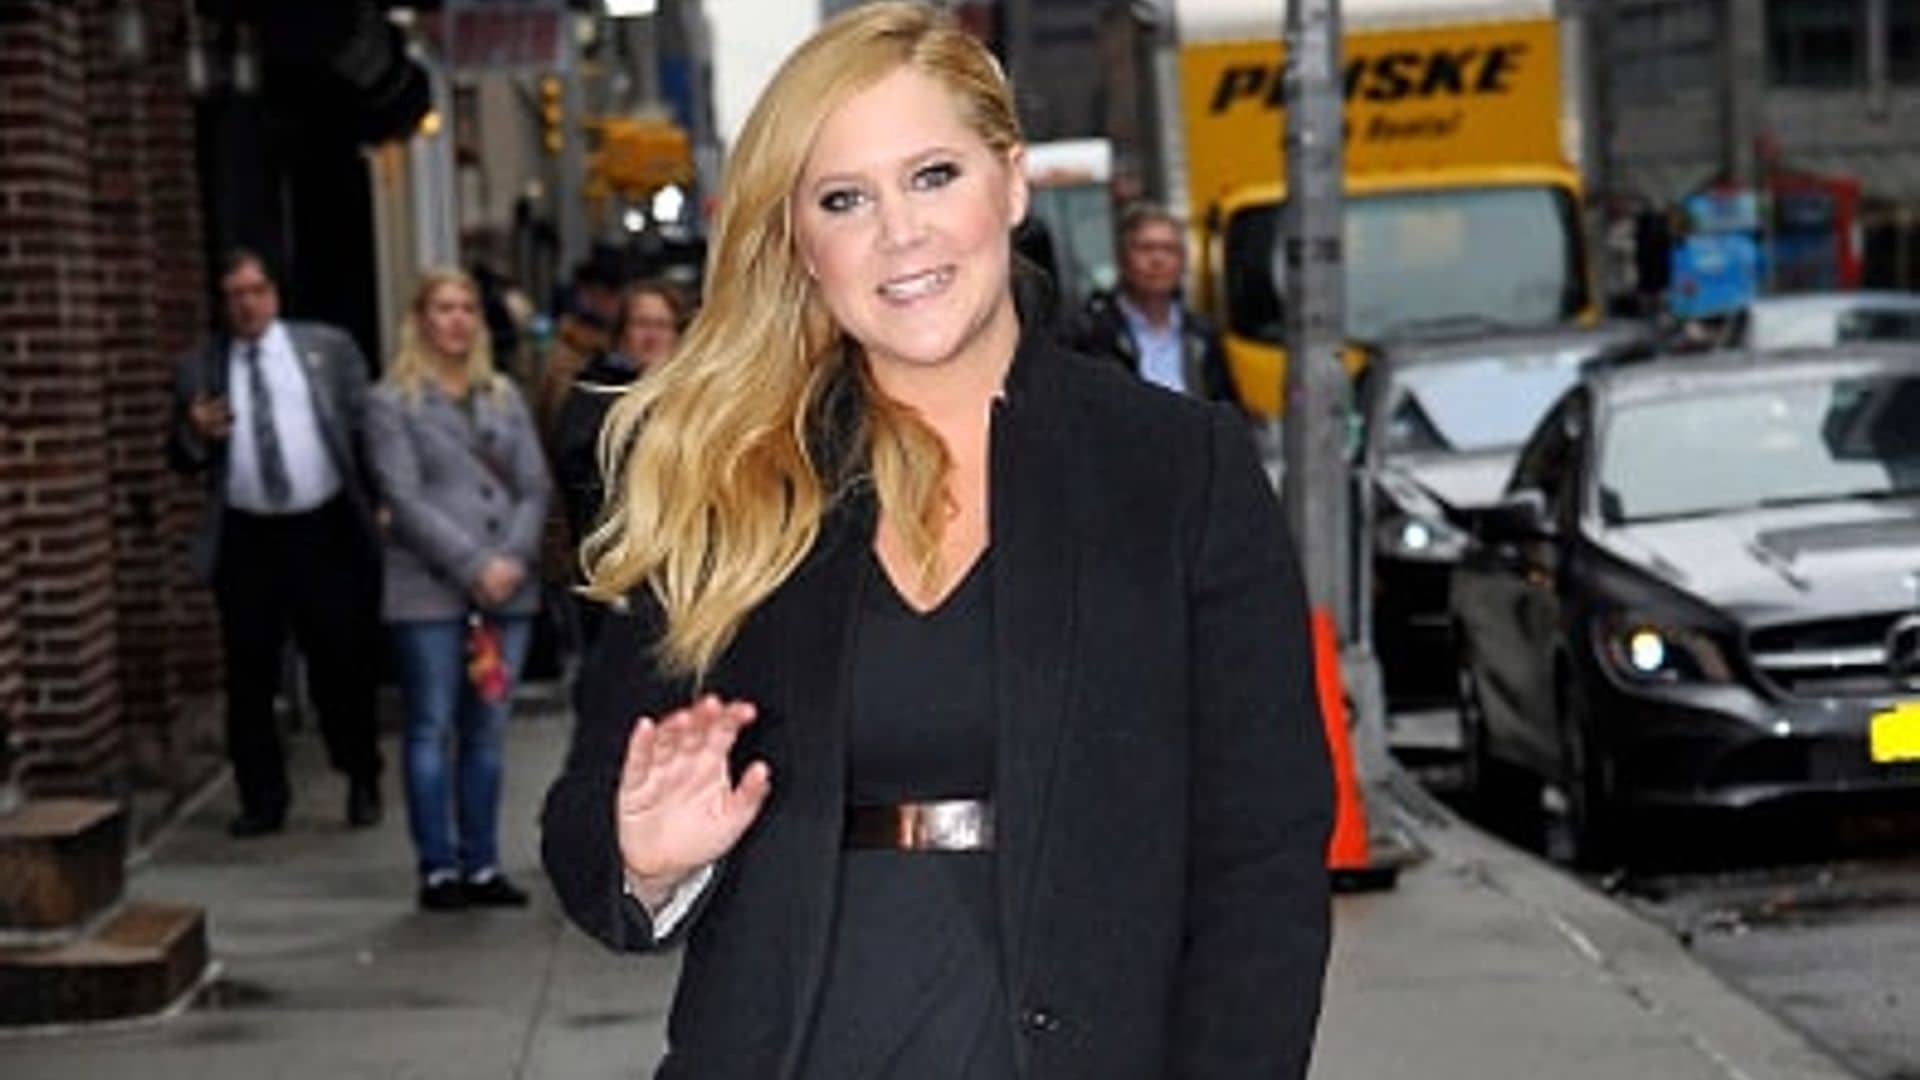 Comedian Amy Schumer shows David Letterman 'something she'll regret'